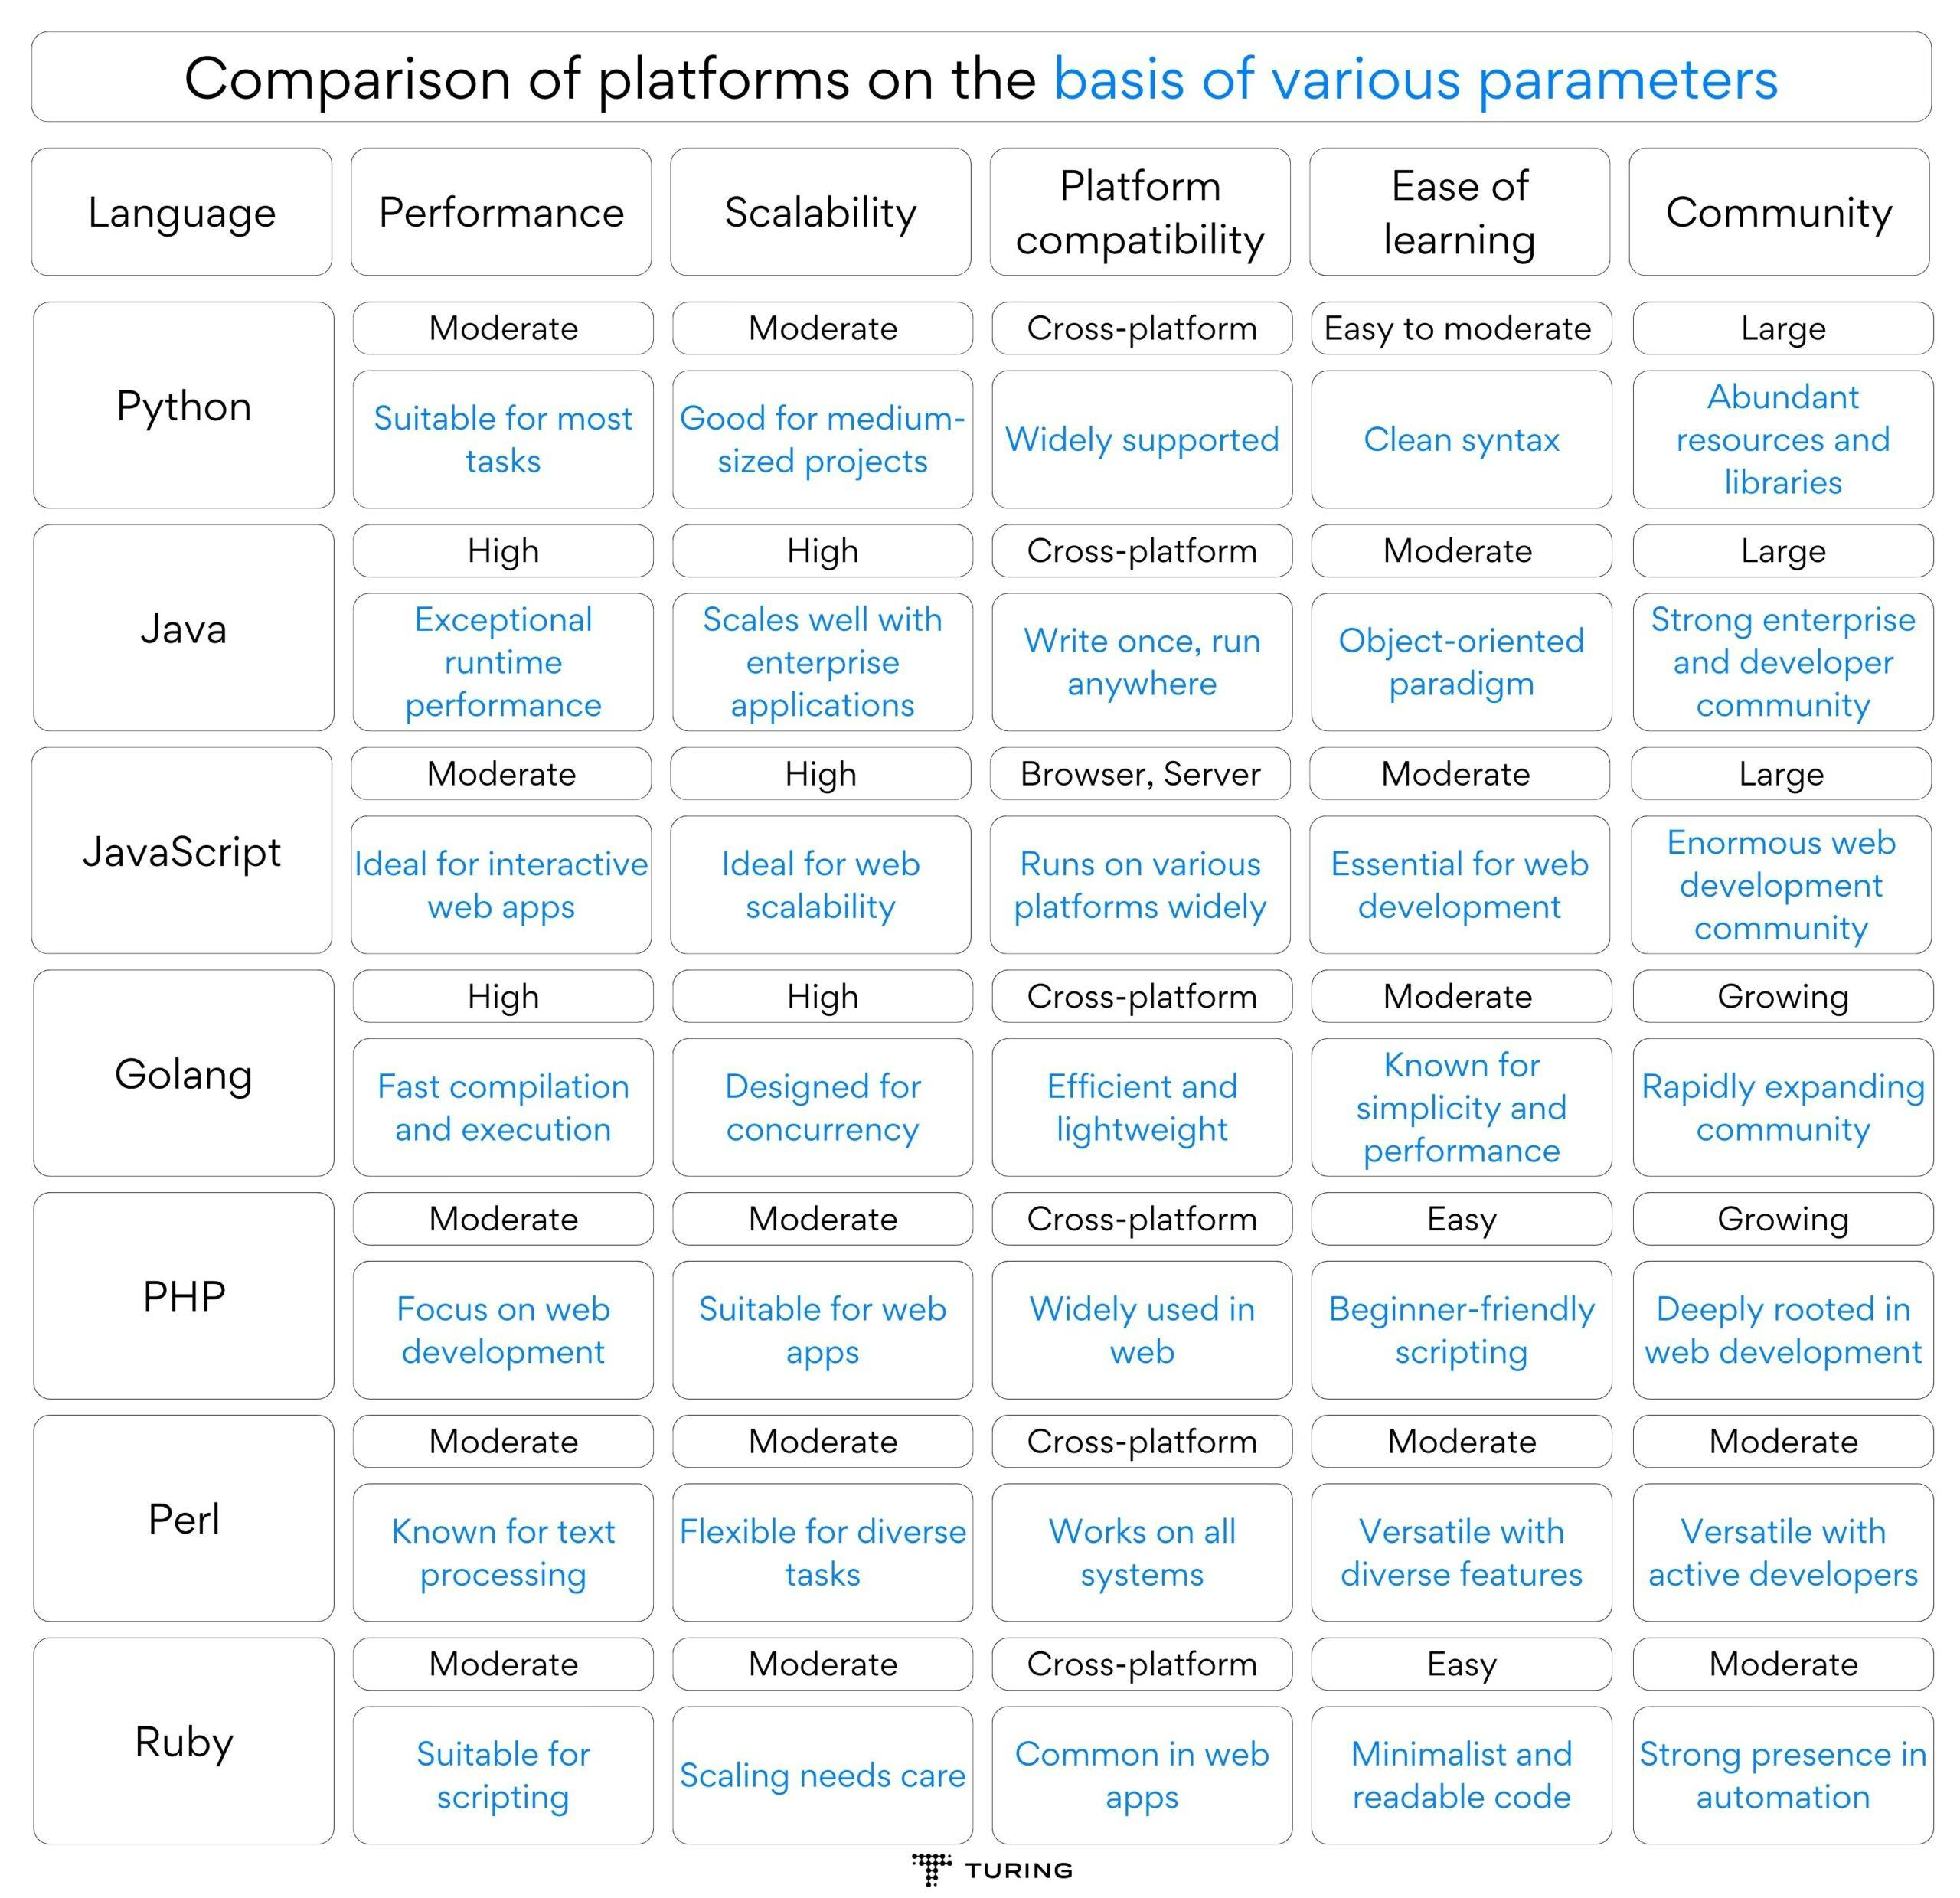 Comparison of platforms on the basis of various parameters